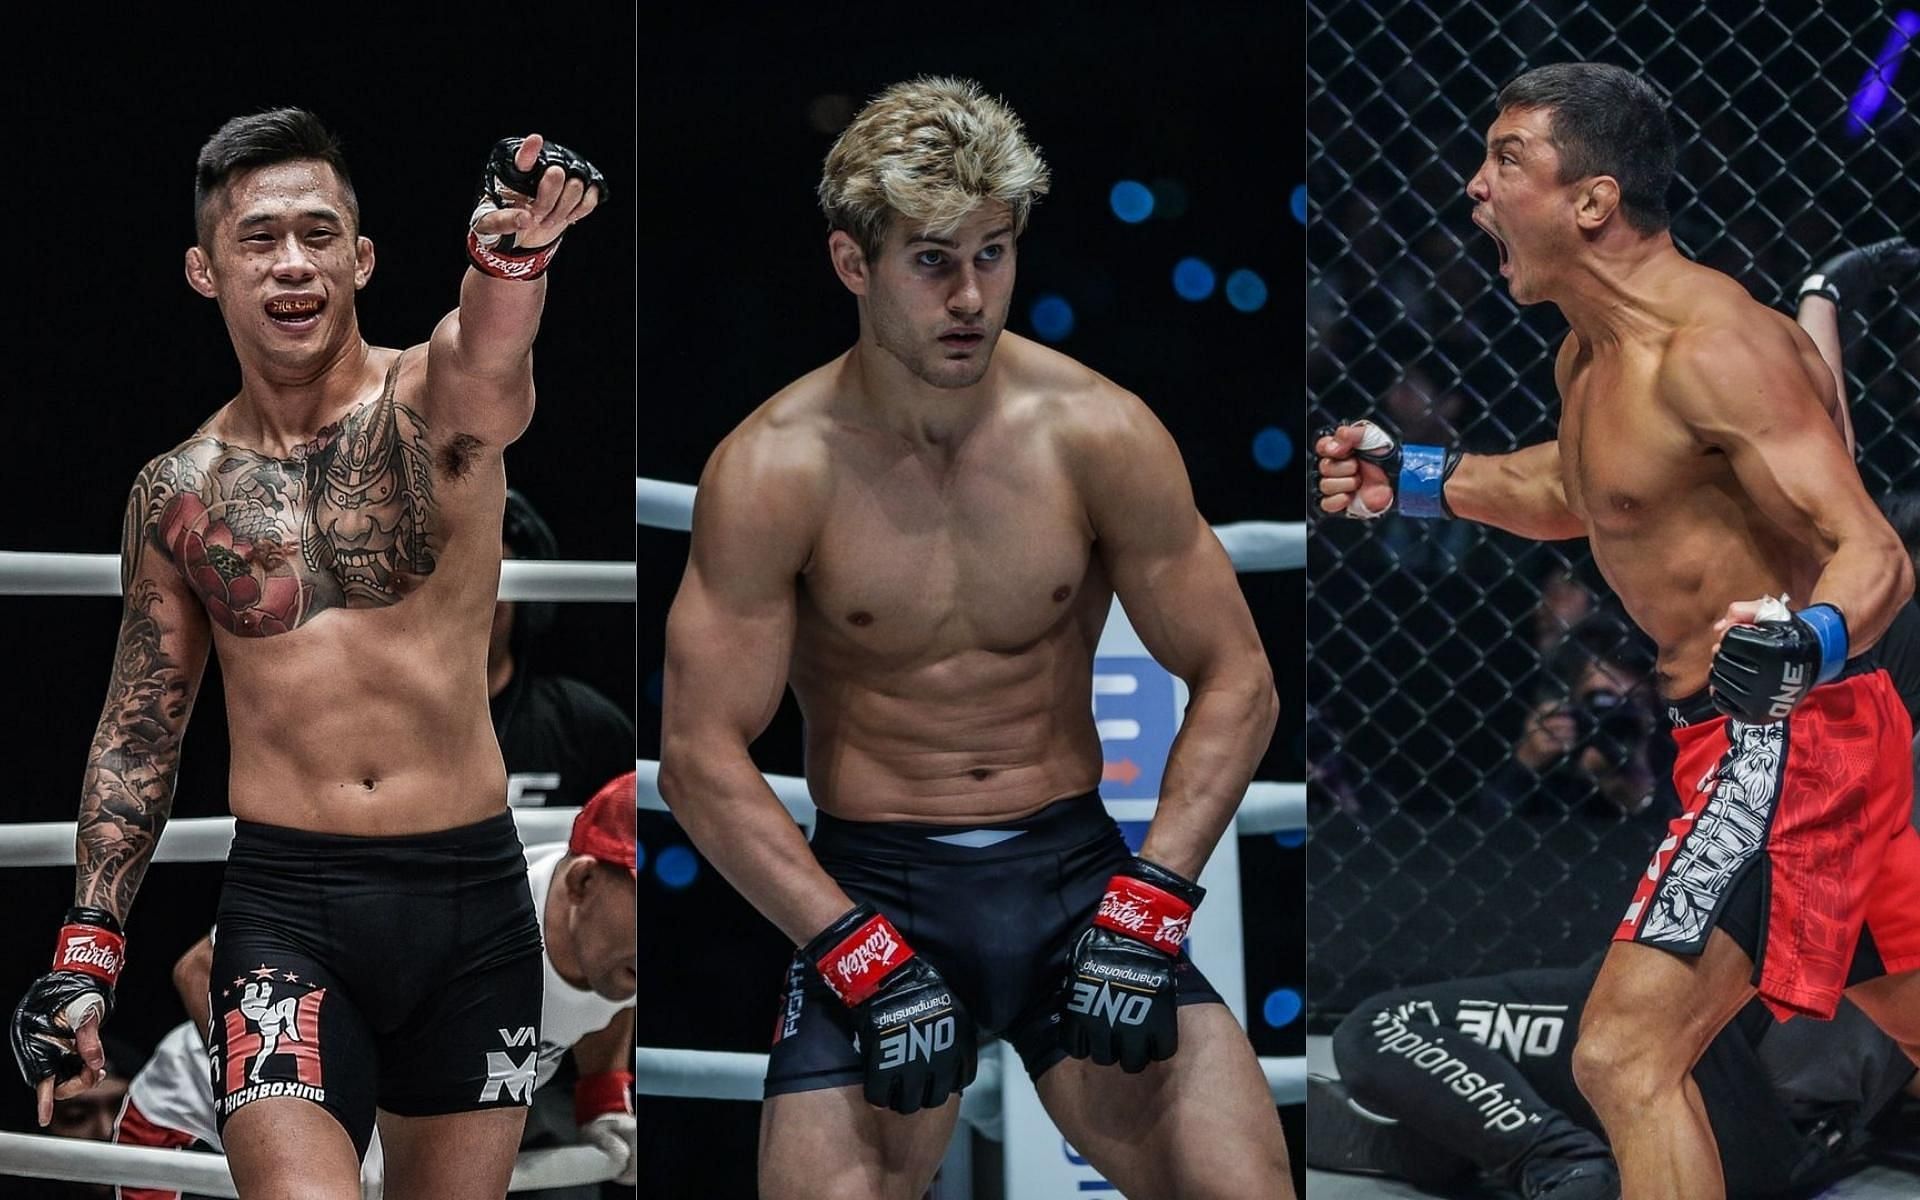 ONE Championship featherweight Martin Nguyen (left) and lightweight Timofey Nastyukhin (right) could be viable opponents for Sage Northcutt (center) at ONE: X. (Images courtesy of ONE Championship)